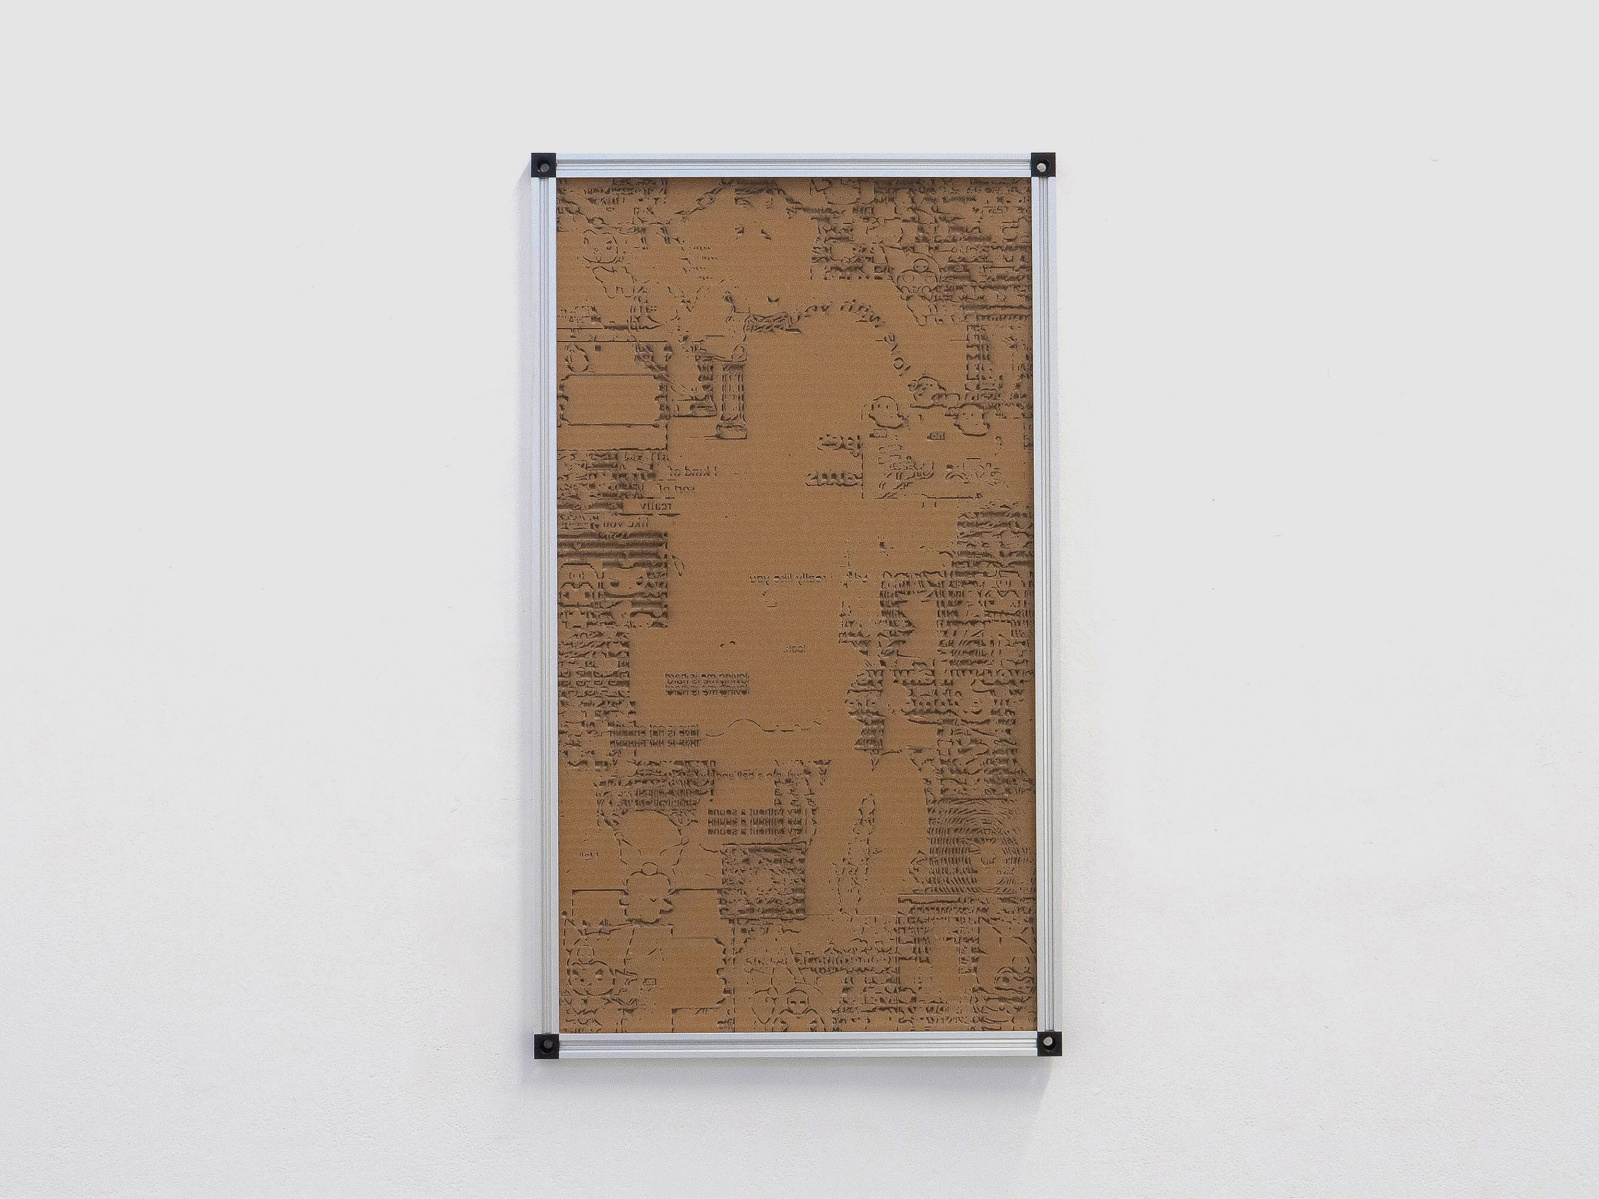 A piece of engraved cardboard that displays lots of small engravings. The engravings depict the internet noise from online goth subculture groups, including cartoon ghosts, chains, Kuromi, reversed words, hearts. The engravings aren't entirely legible. The work is in an aluminium v-slot frame.